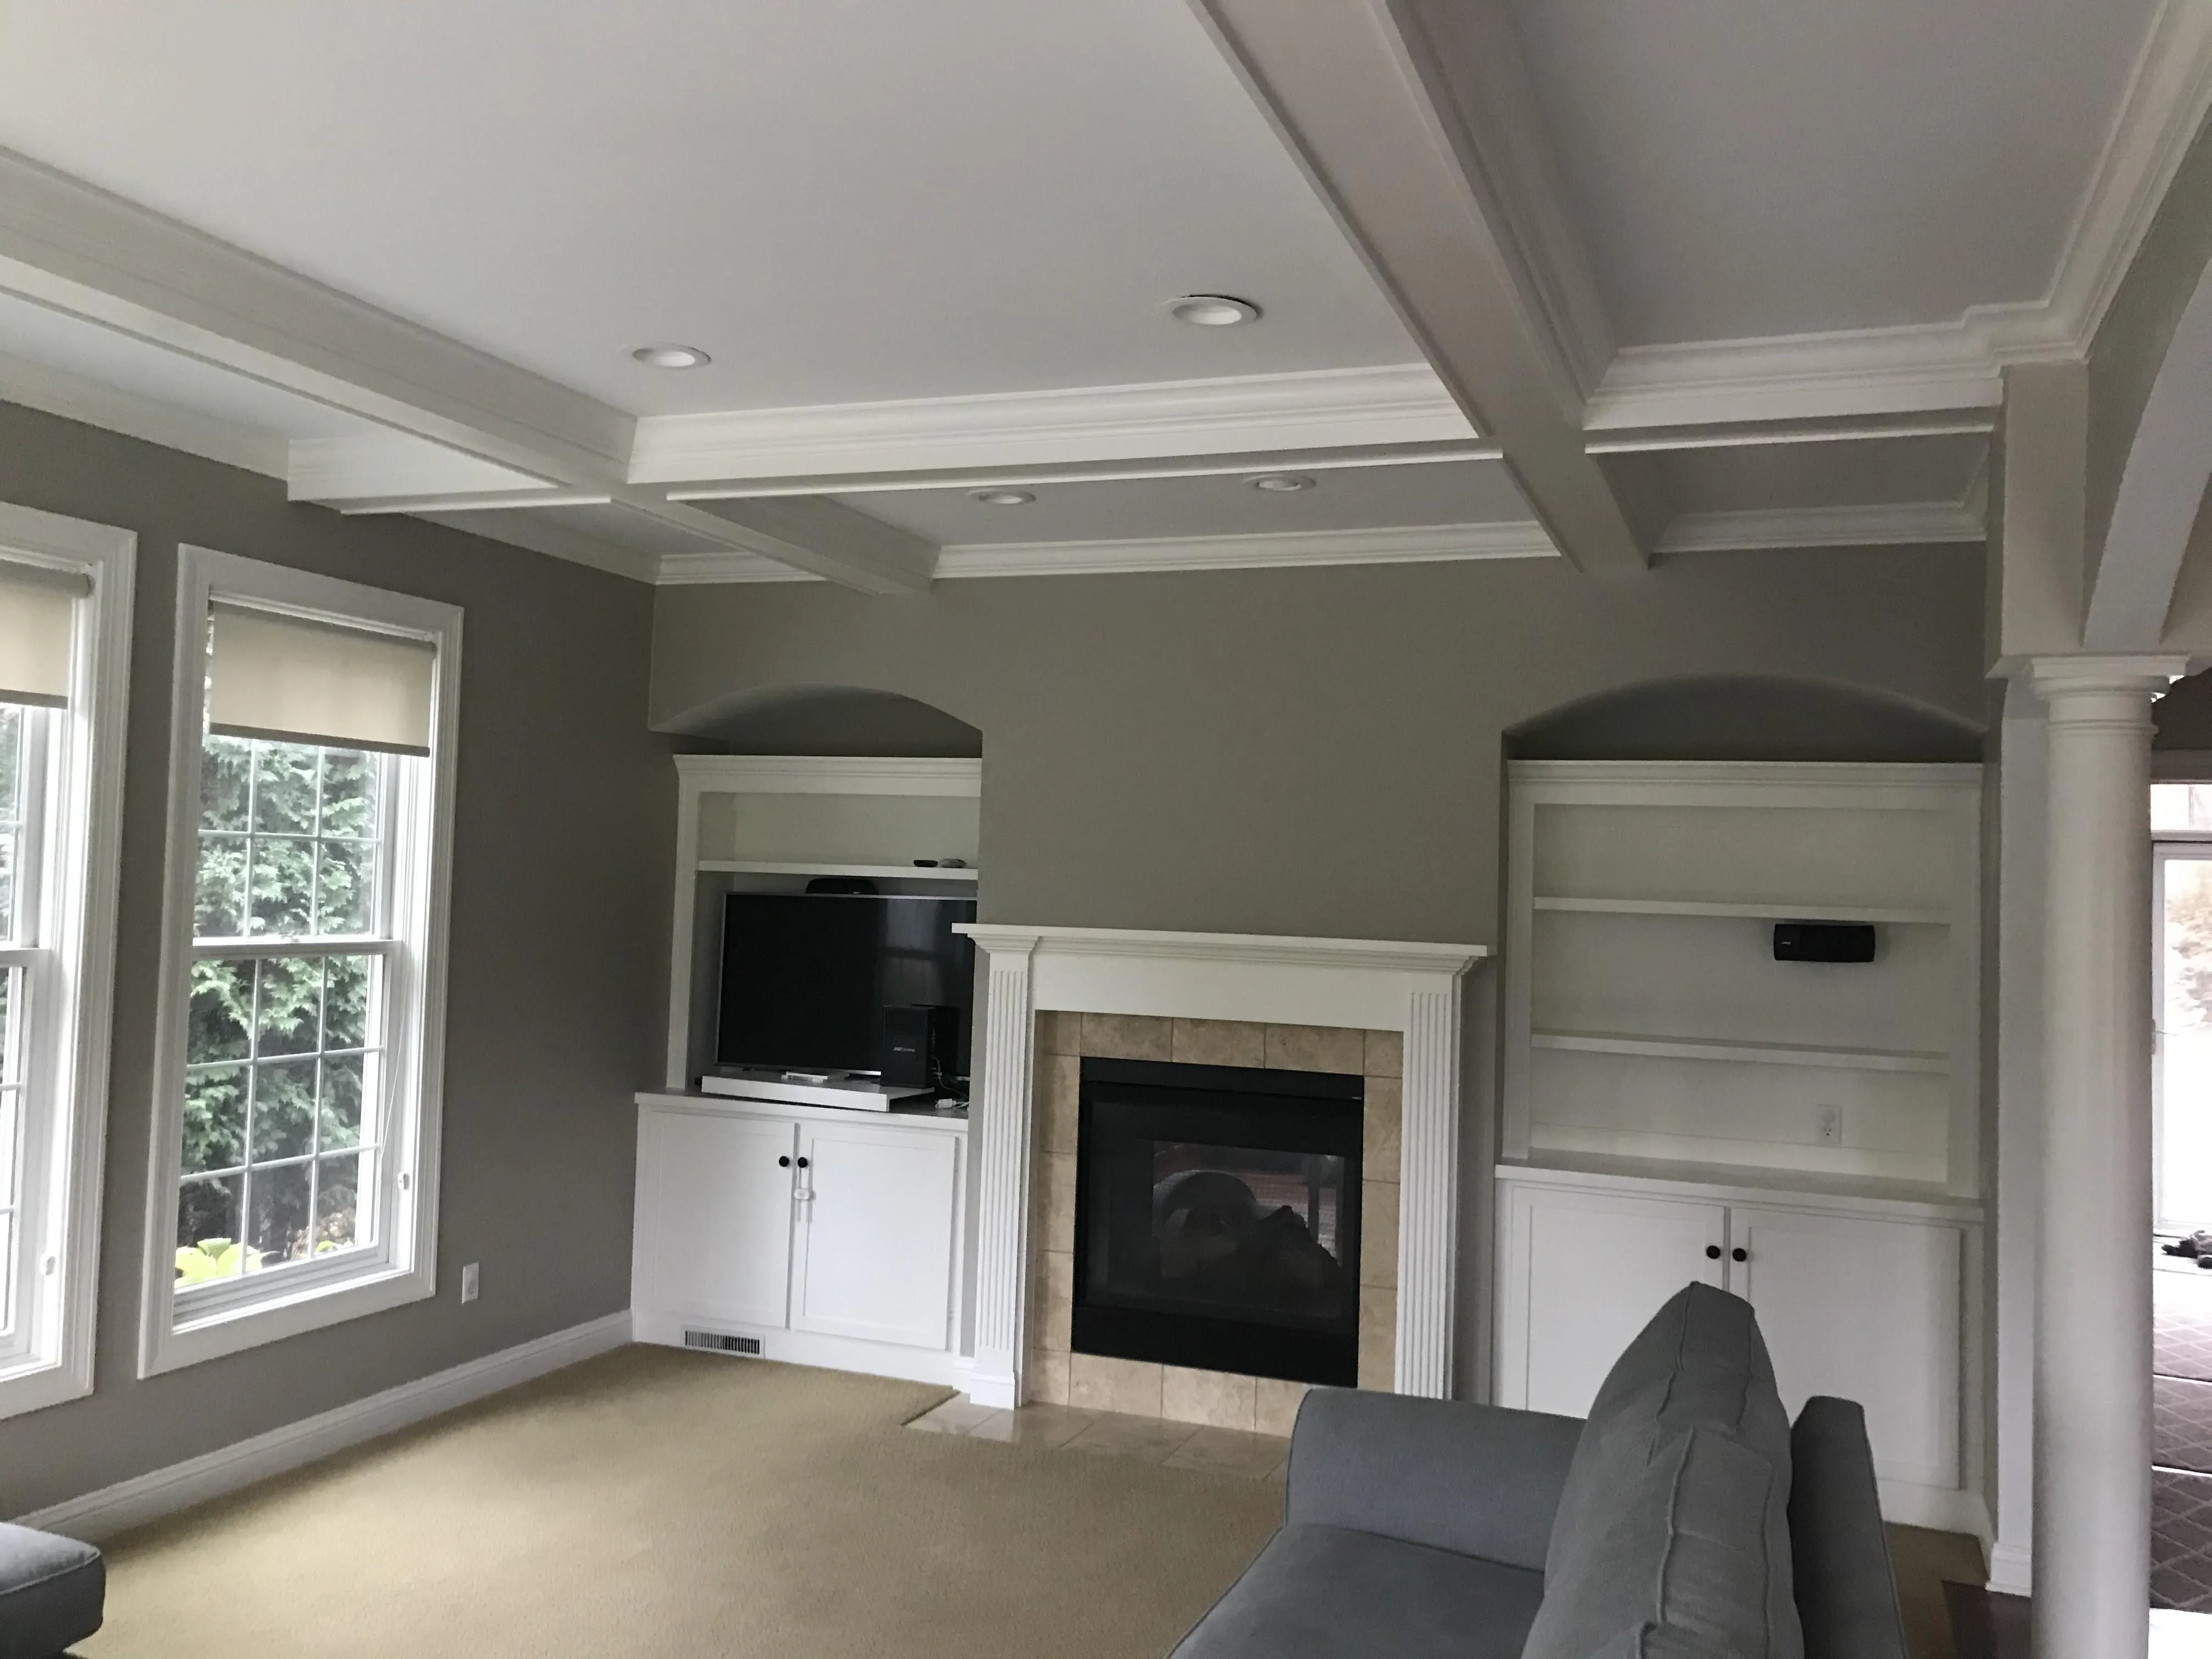 Interior Painting for Pirrung Painting in Sheboygan, Wisconsin